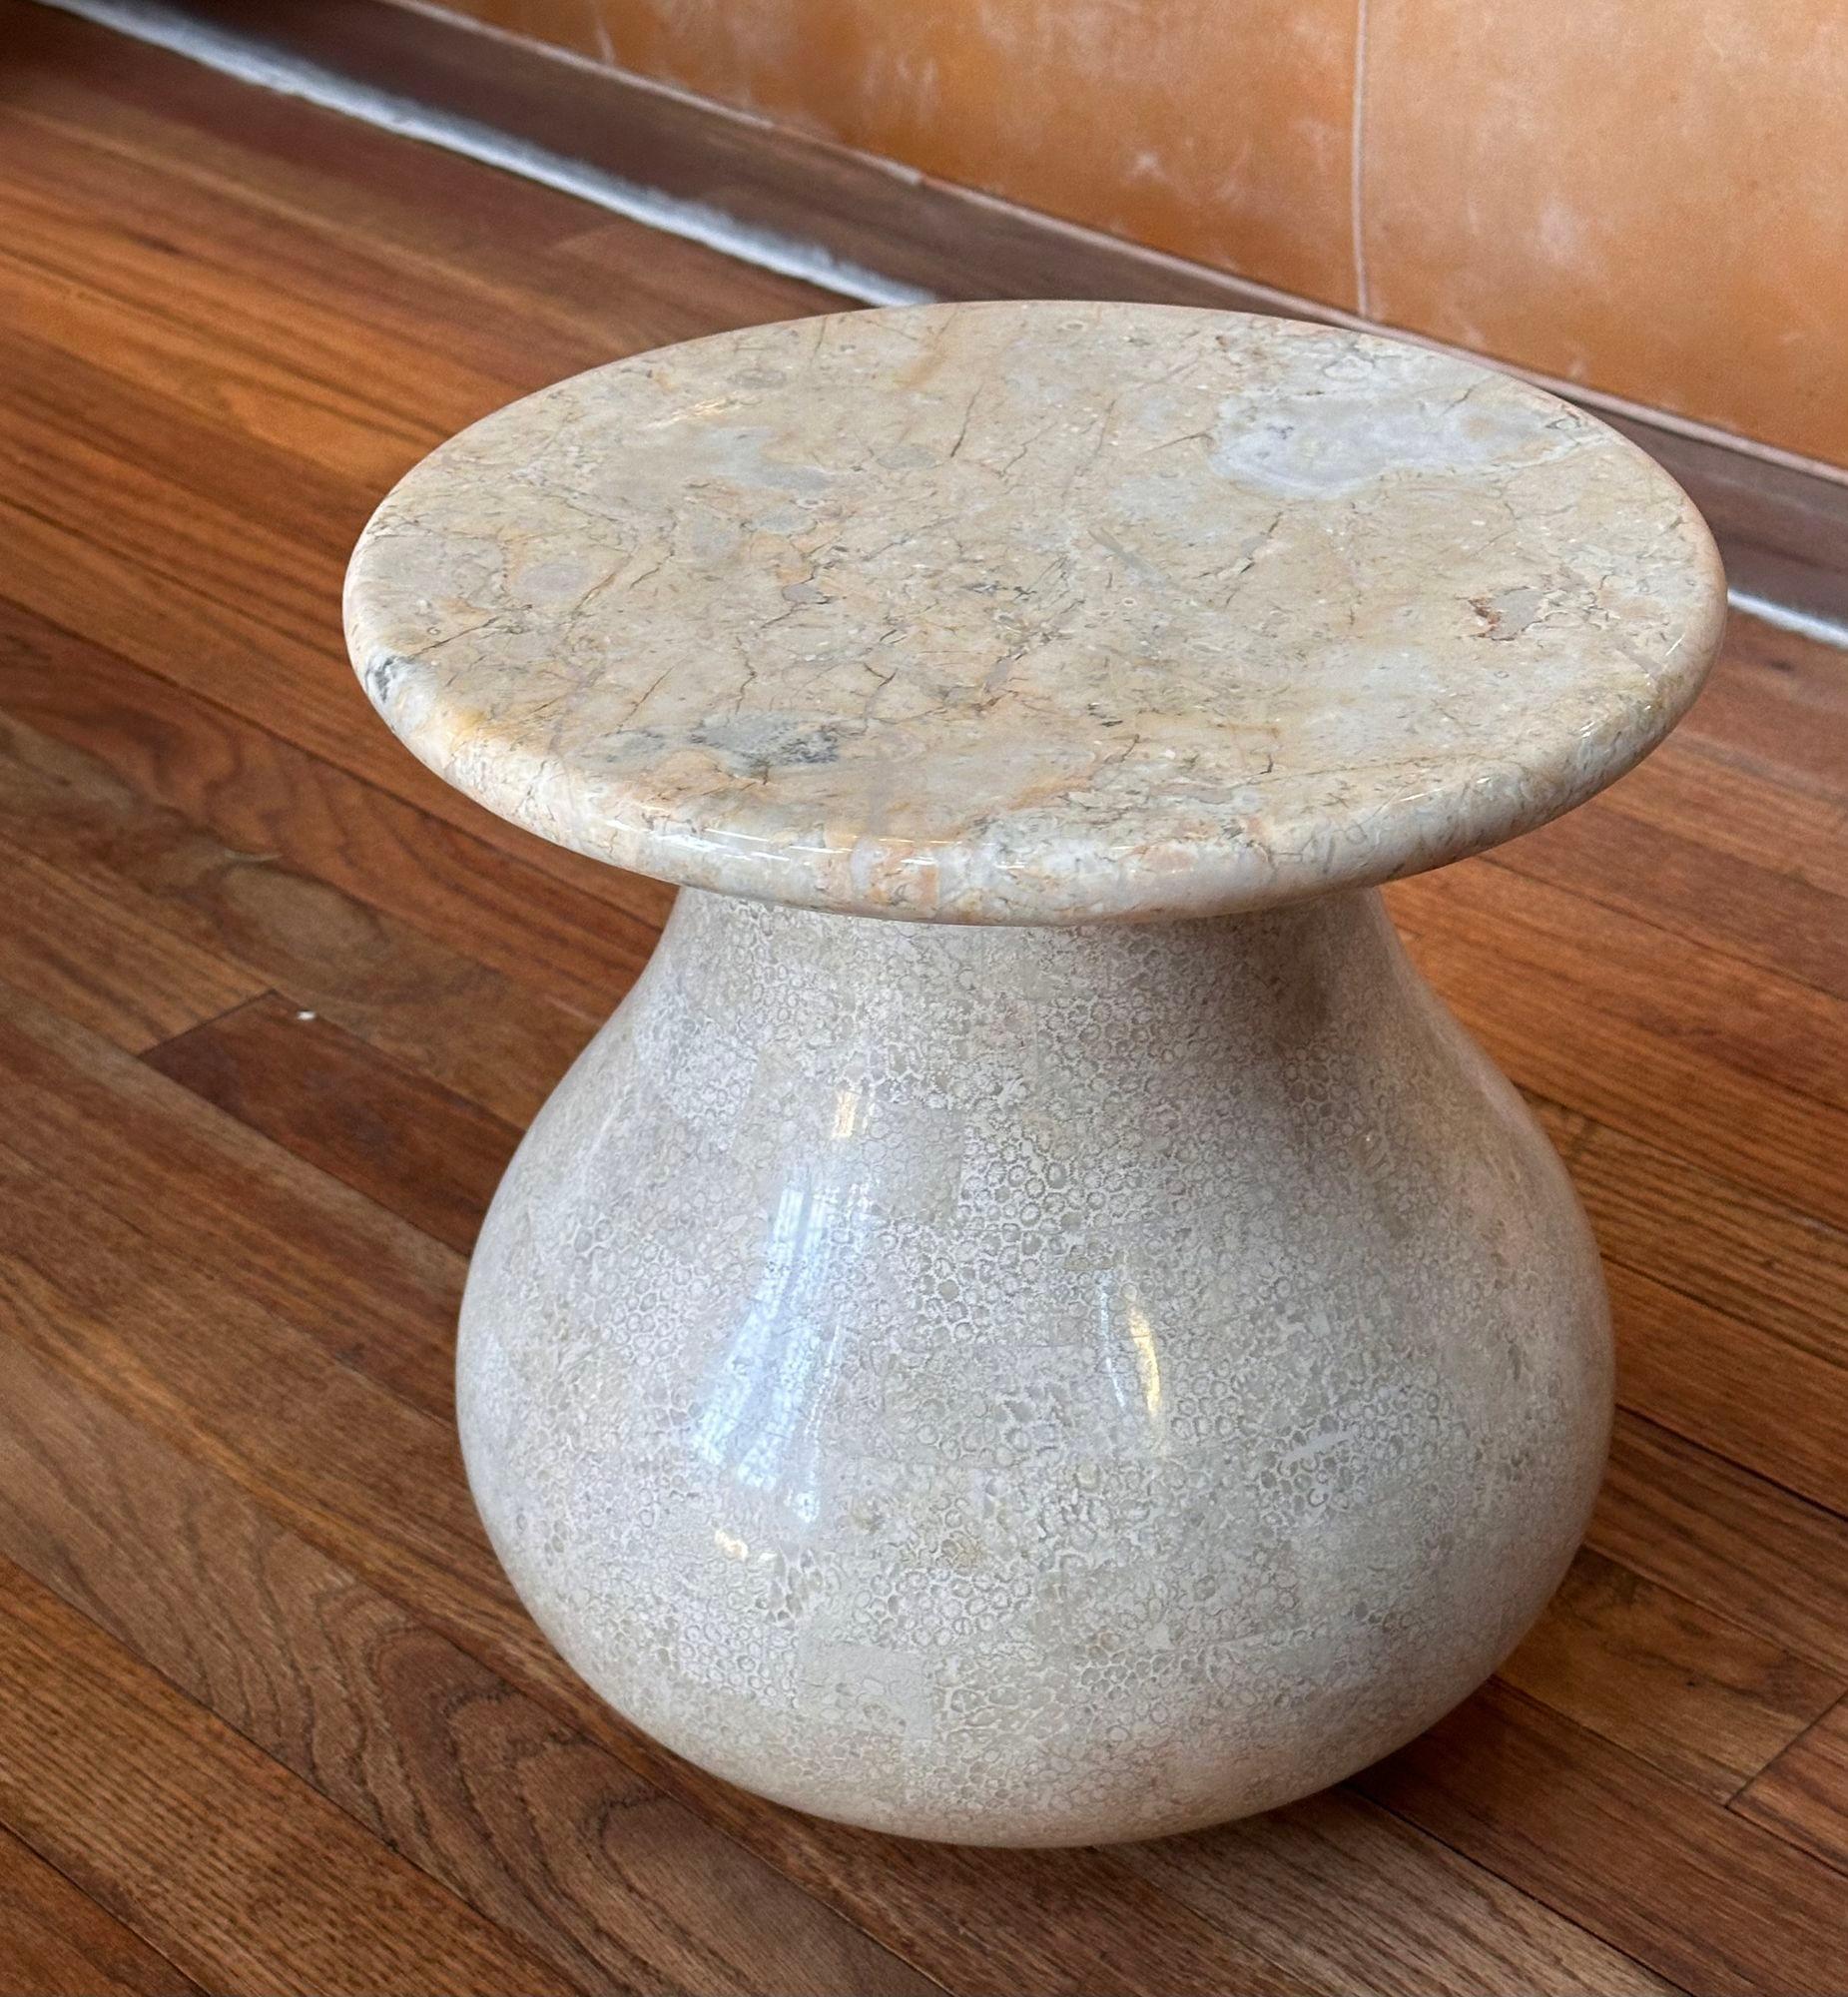 Tessellated Travertine Stone Drink/Side Table, French 1970. In the style of Elizabeth Garouste and Mattia Bonetti.
Measures 12